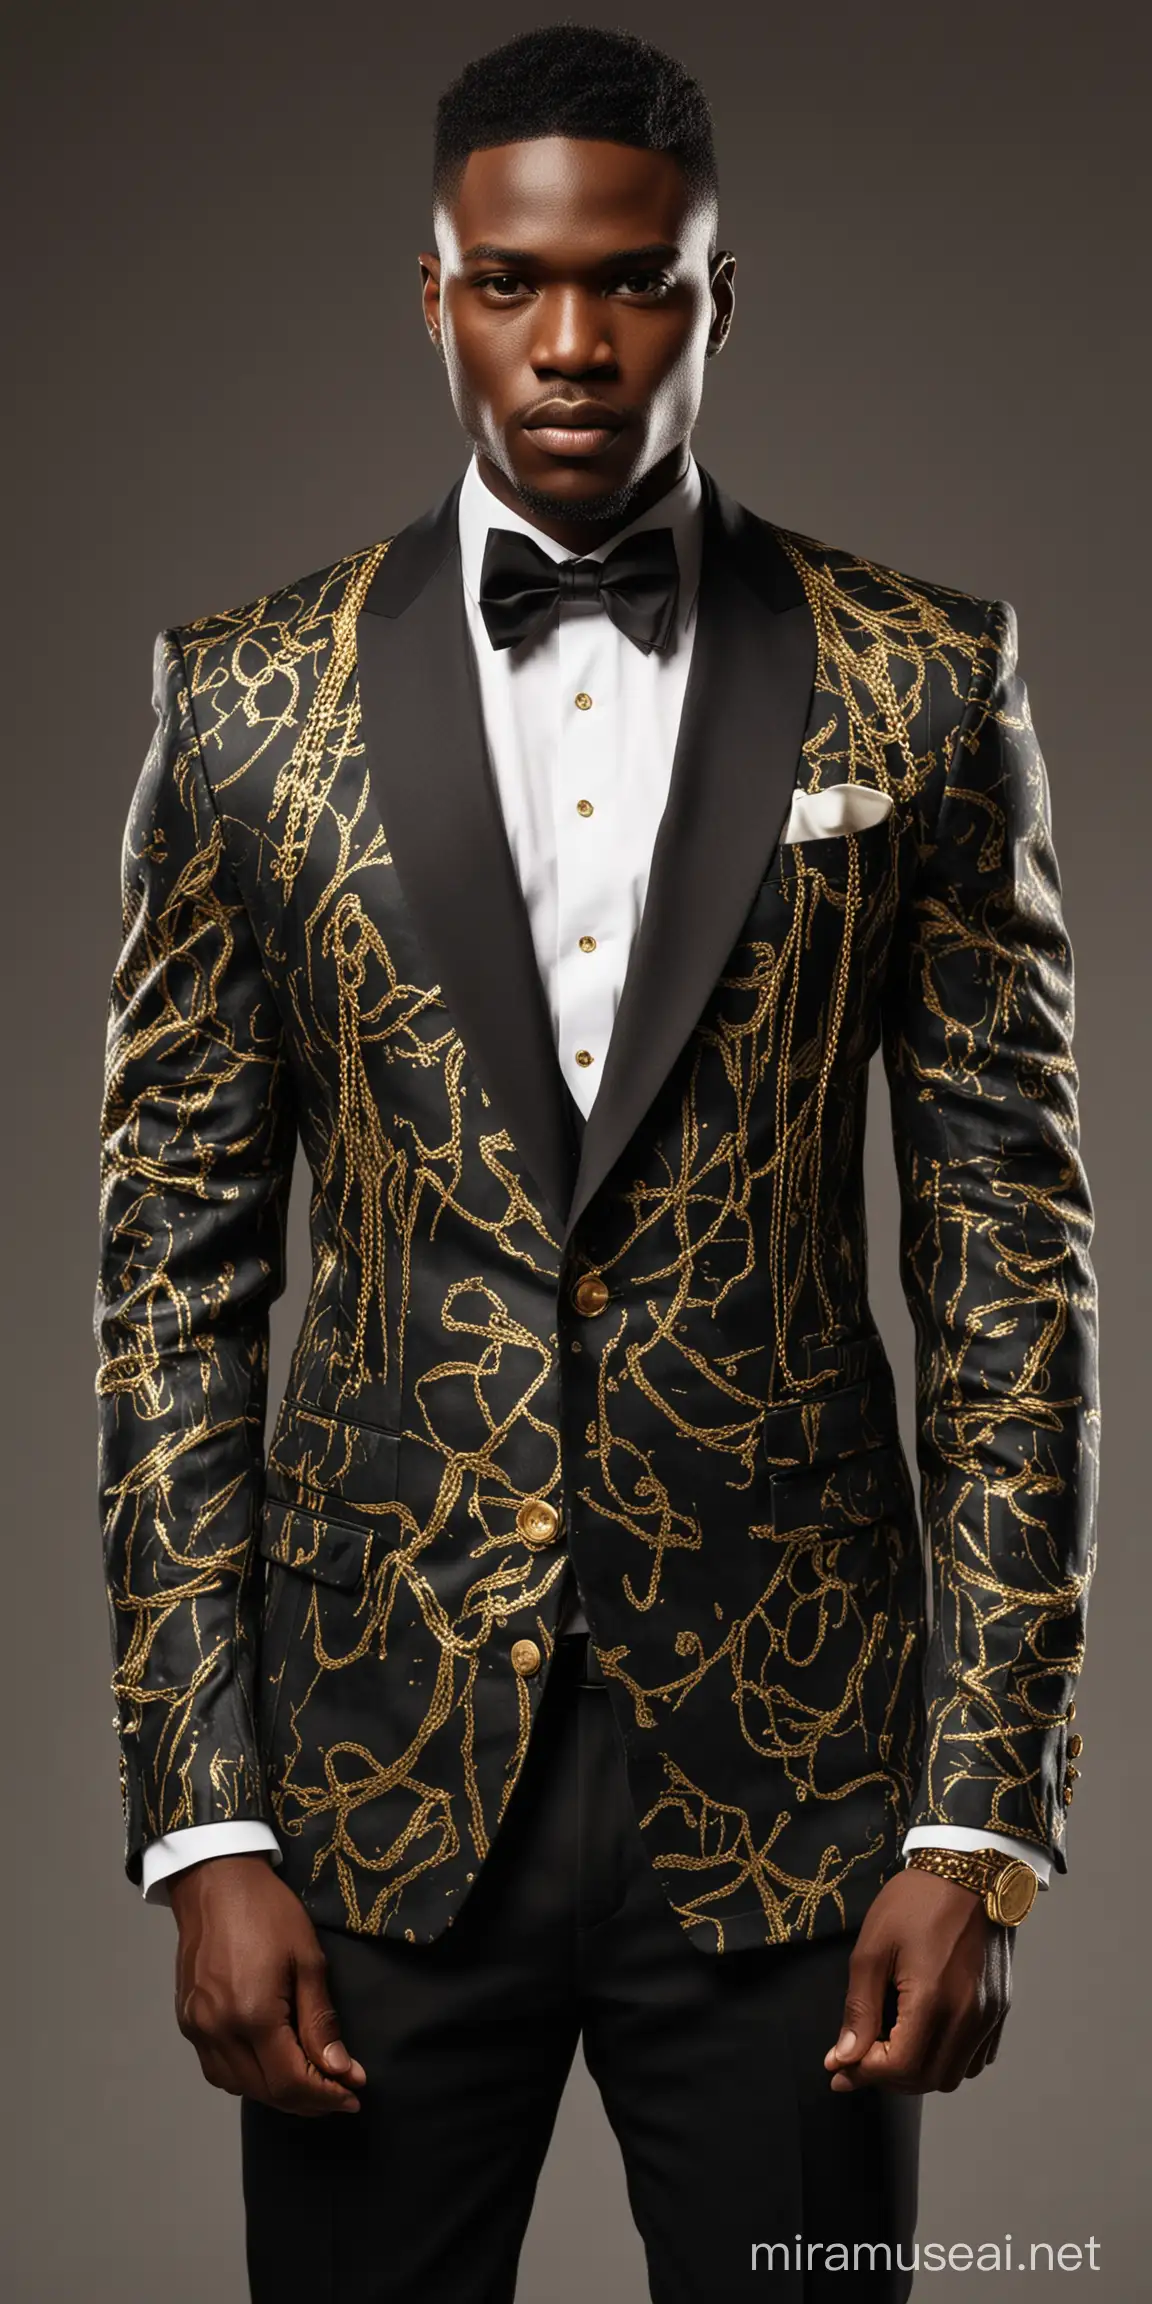 African Male Model in Camouflage Tuxedo with Gold Accents on Runway